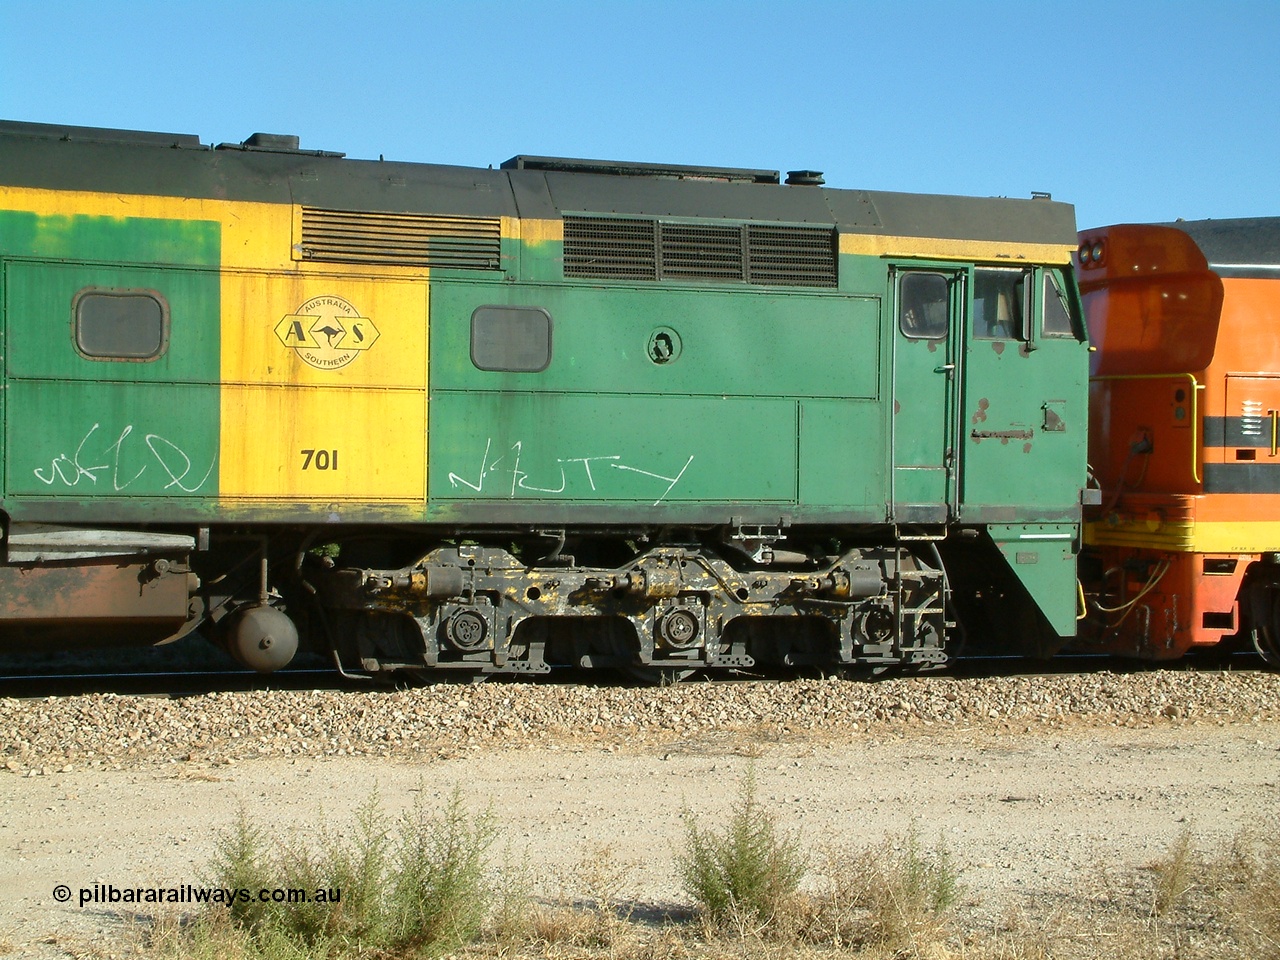 030403 154946
Gladstone, former South Australian Railways AE Goodwin built DL500G ALCo designated the 700 class, class leader 701 serial G6042-2, B end cab side shot, leads a grain train being loaded on the 3rd April 2003.
Keywords: 700-class;701;AE-Goodwin;ALCo;DL500G;G6042-2;